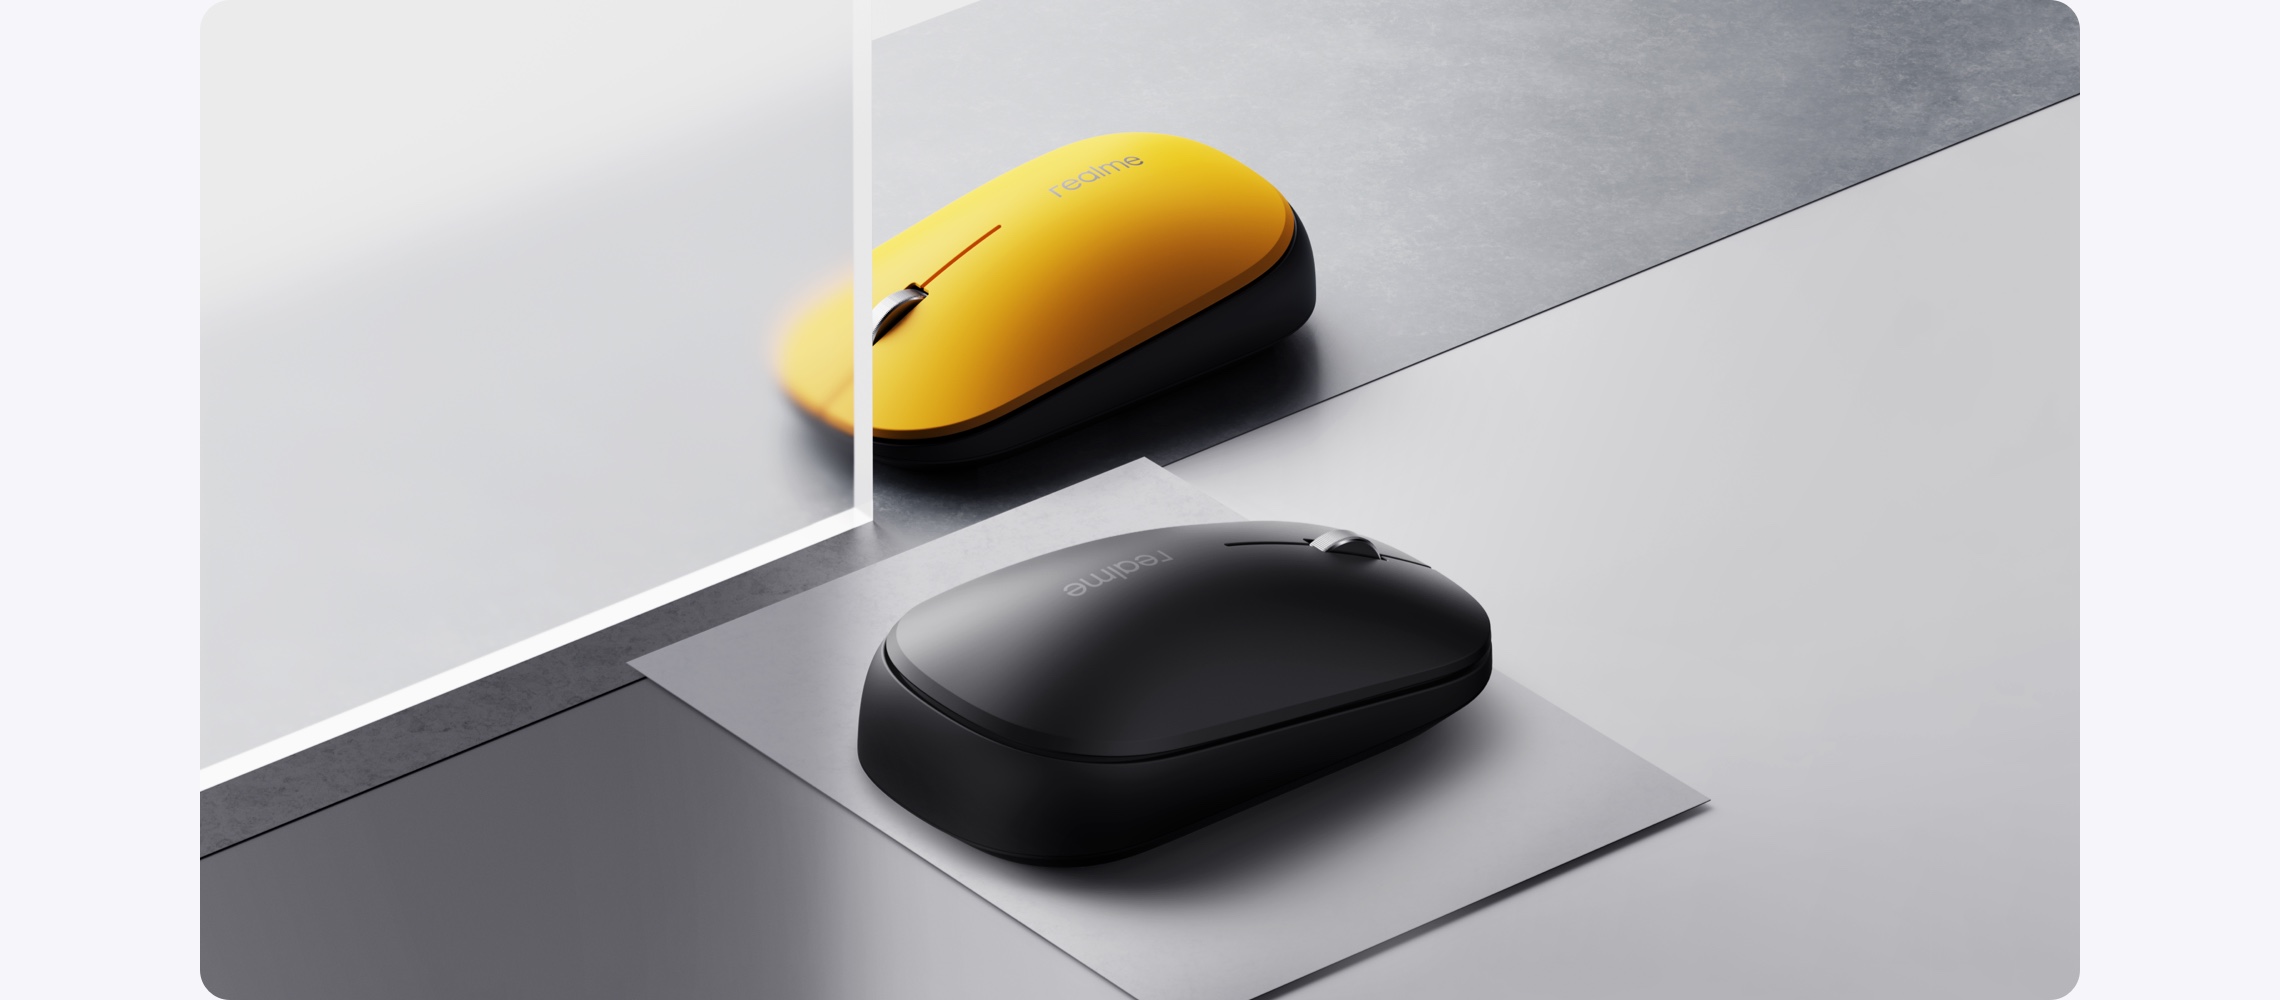 realme Just Released The Minimalist Wireless Mouse-Silent